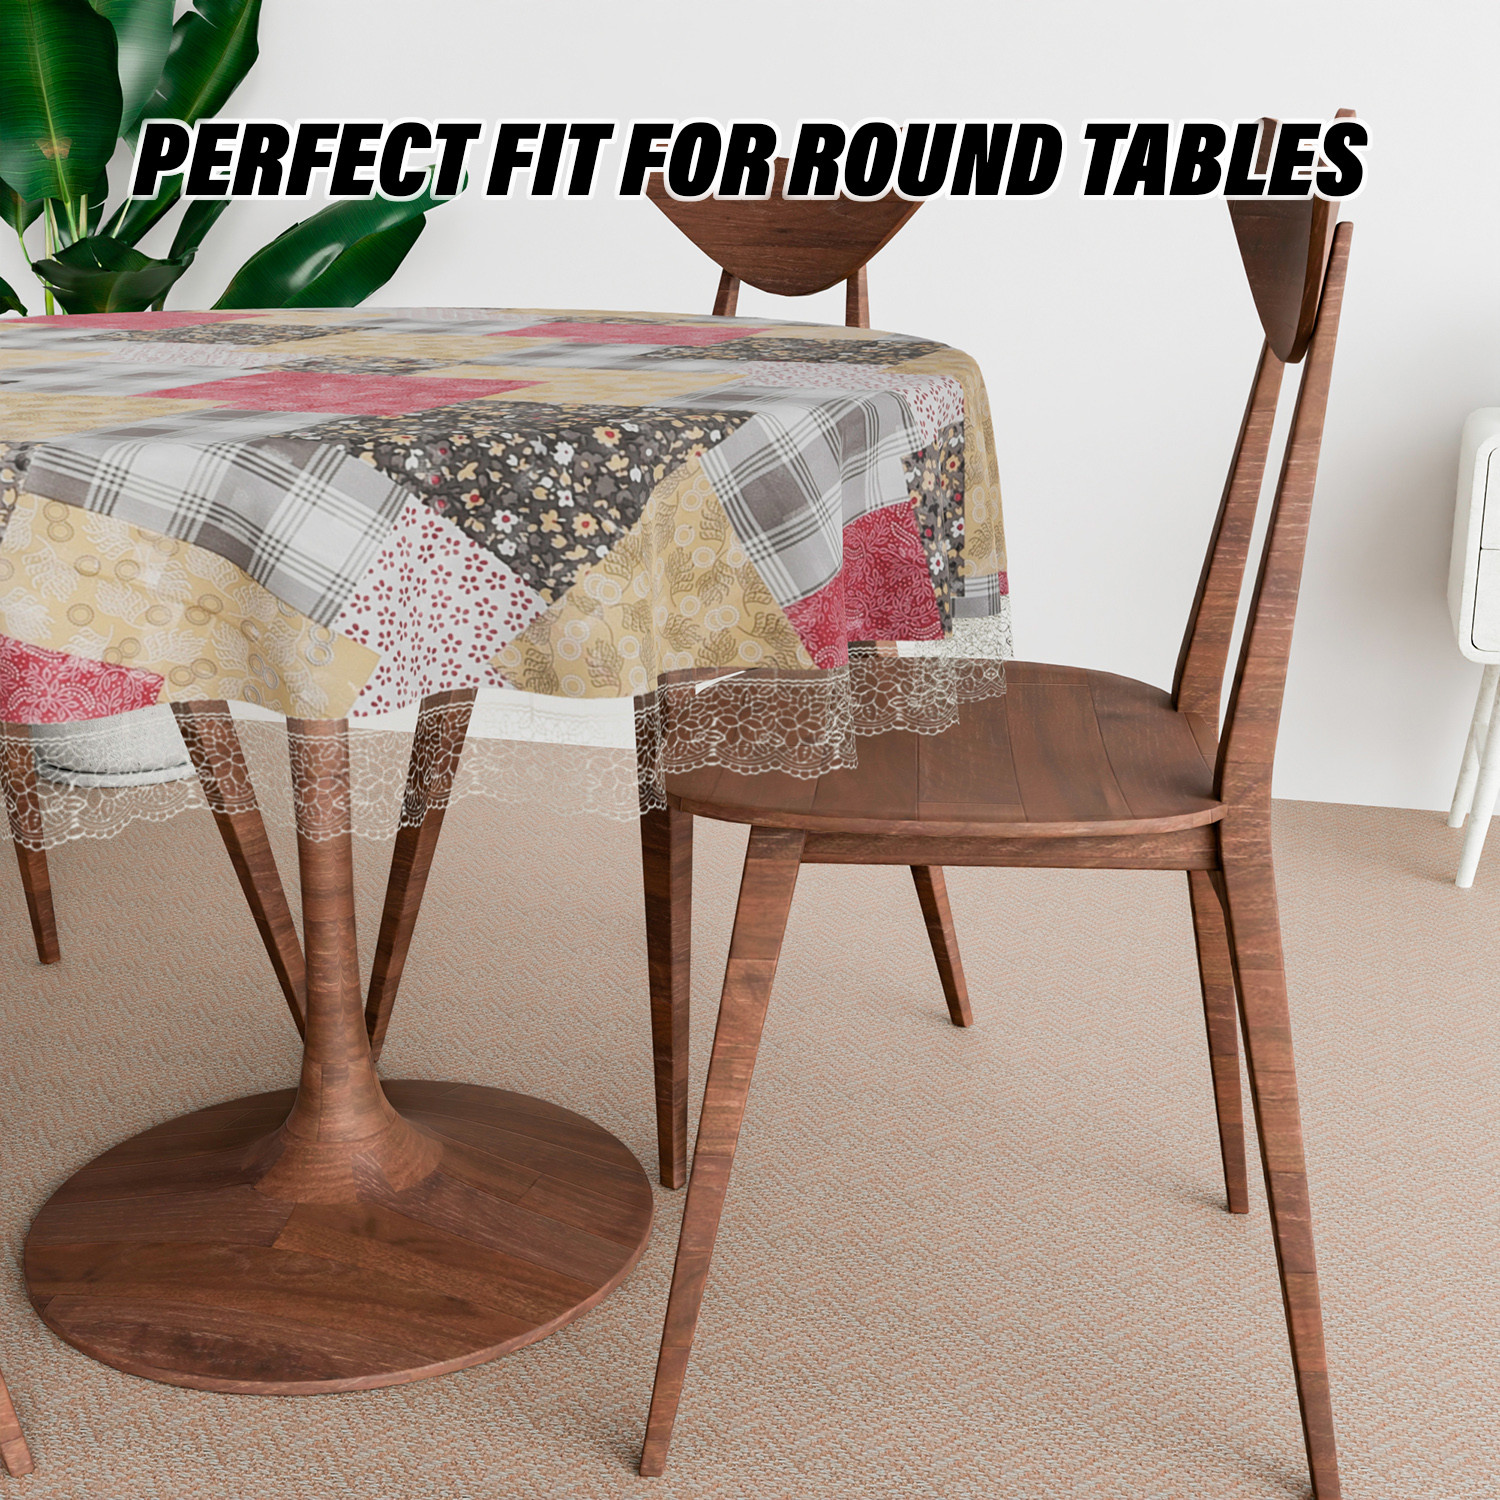 Kuber Industries Round Table Cover | Table Cloth for Round Tables | 4 Seater Round Table Cloth | Barik Flower Kitchen Dining Tablecloth | Tabletop Cover | 60 Inch | Maroon